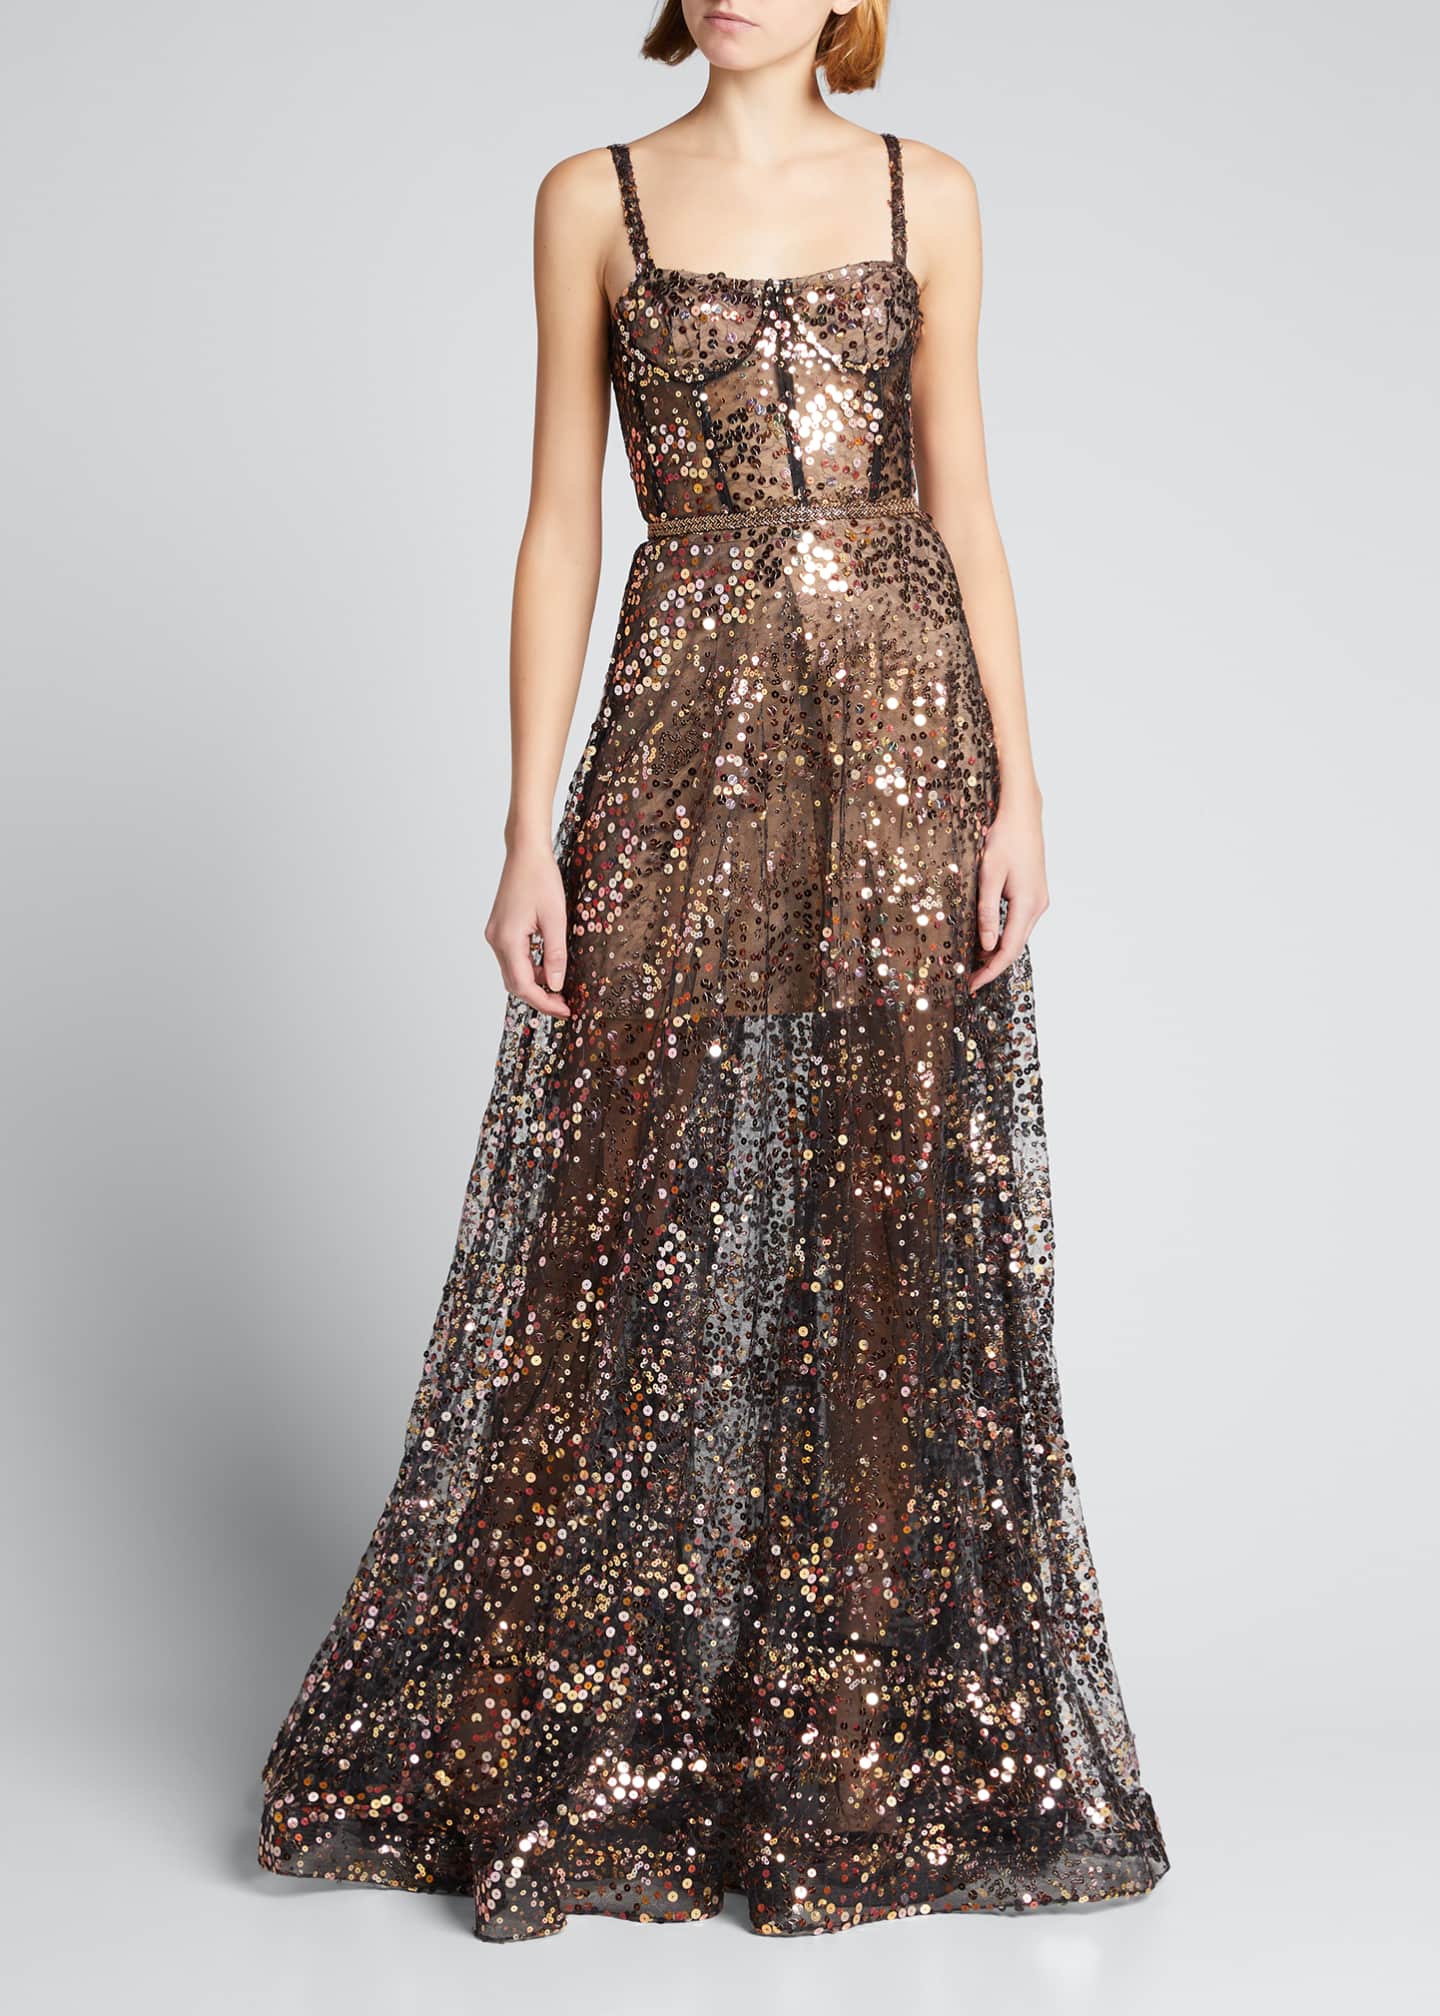 Bronx and Banco Midnite Noir Sequin Embellished Gown | Bergdorf Goodman